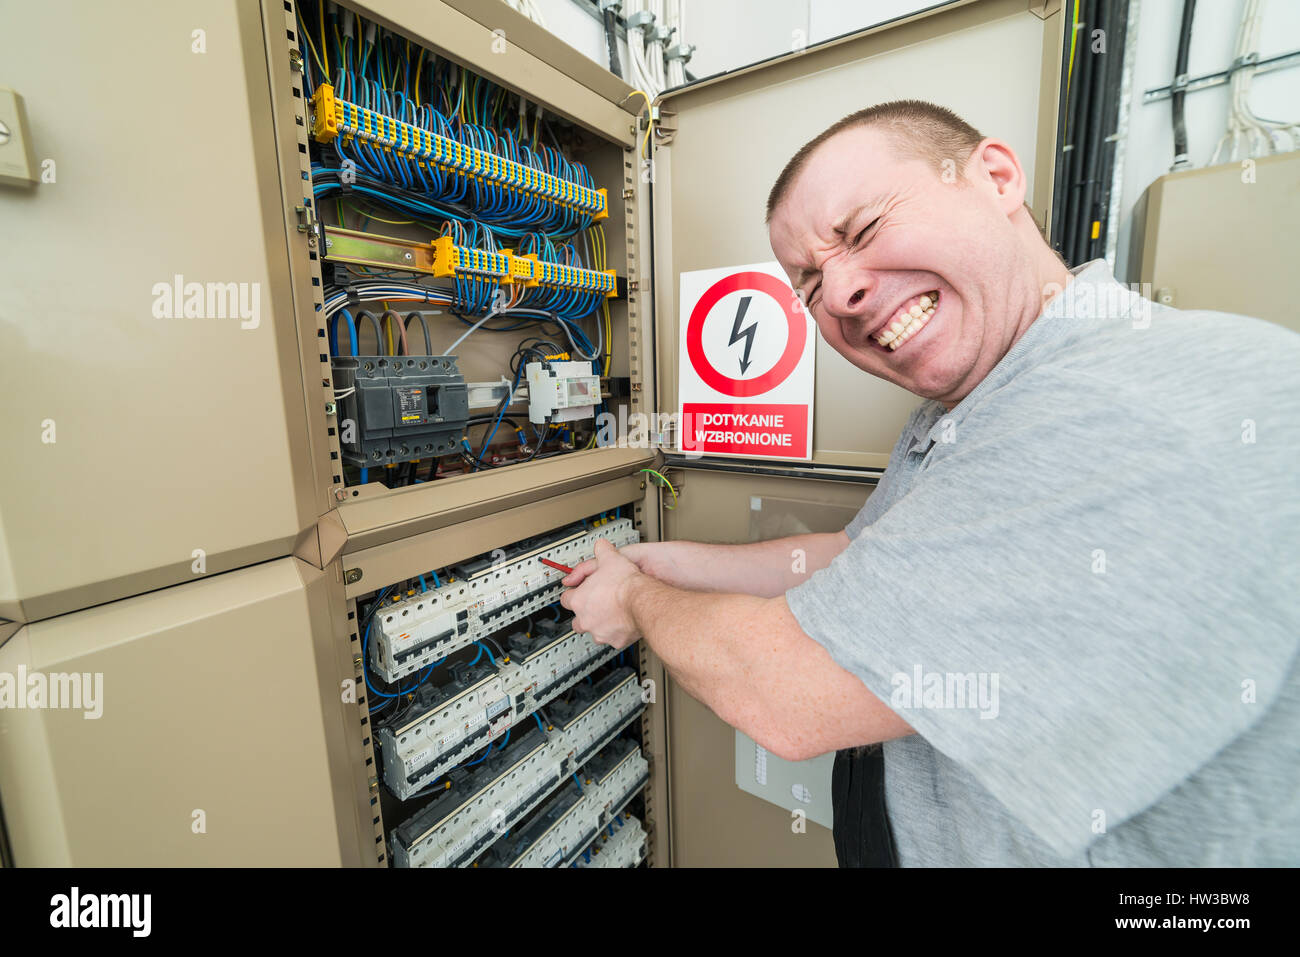 electrician electrocuted. grimace of pain on his face Stock Photo